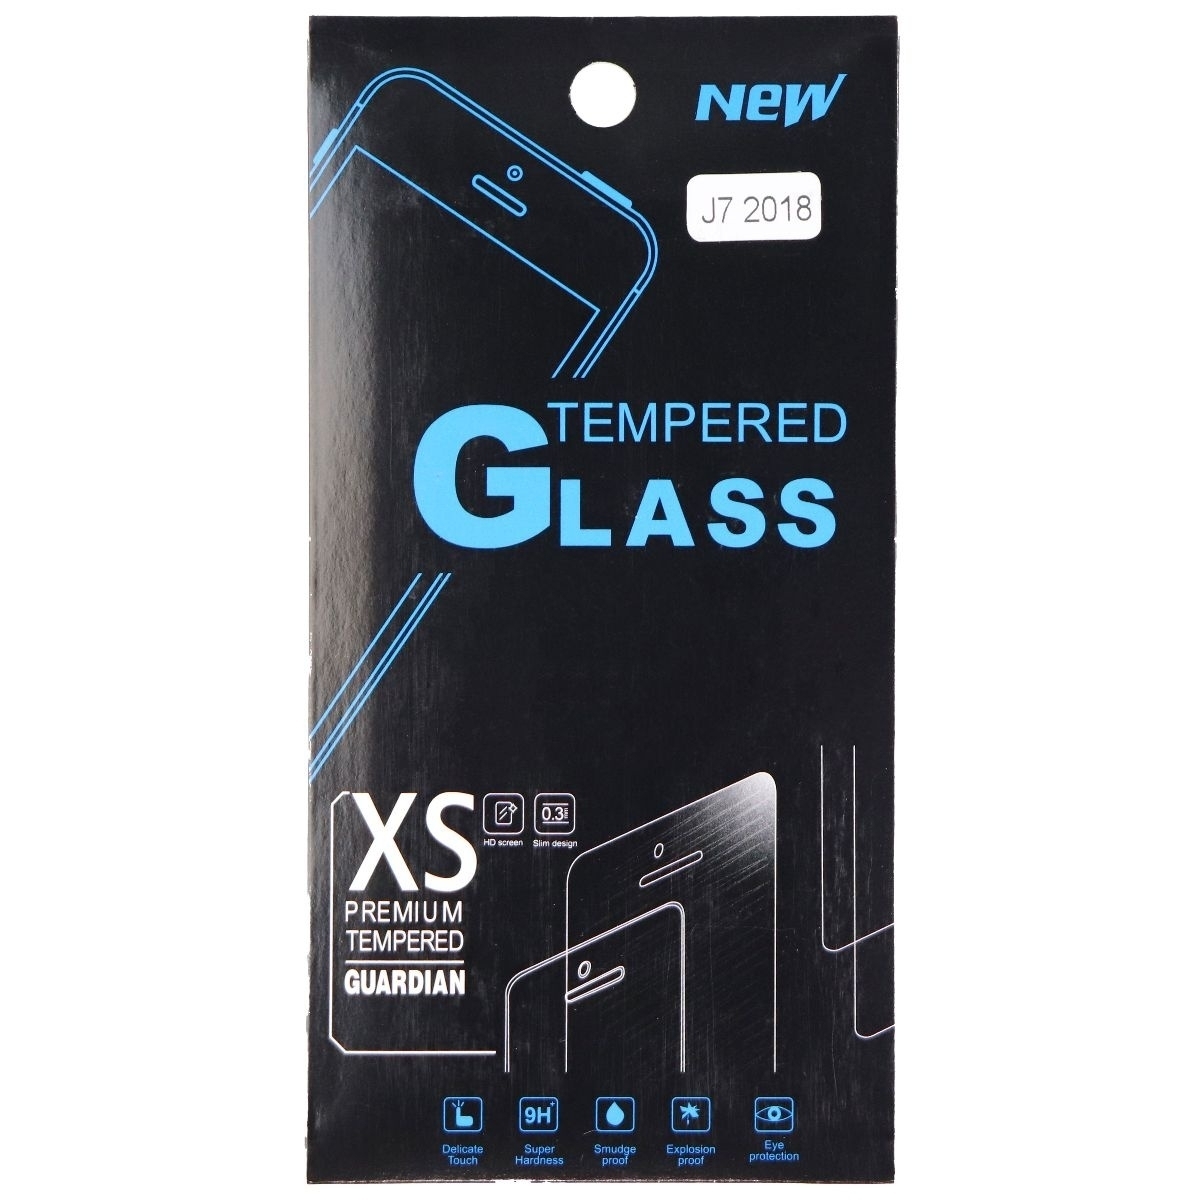 Guardian Premium Tempered Glass Screen Protector For Samsung Galaxy J7 (2018)